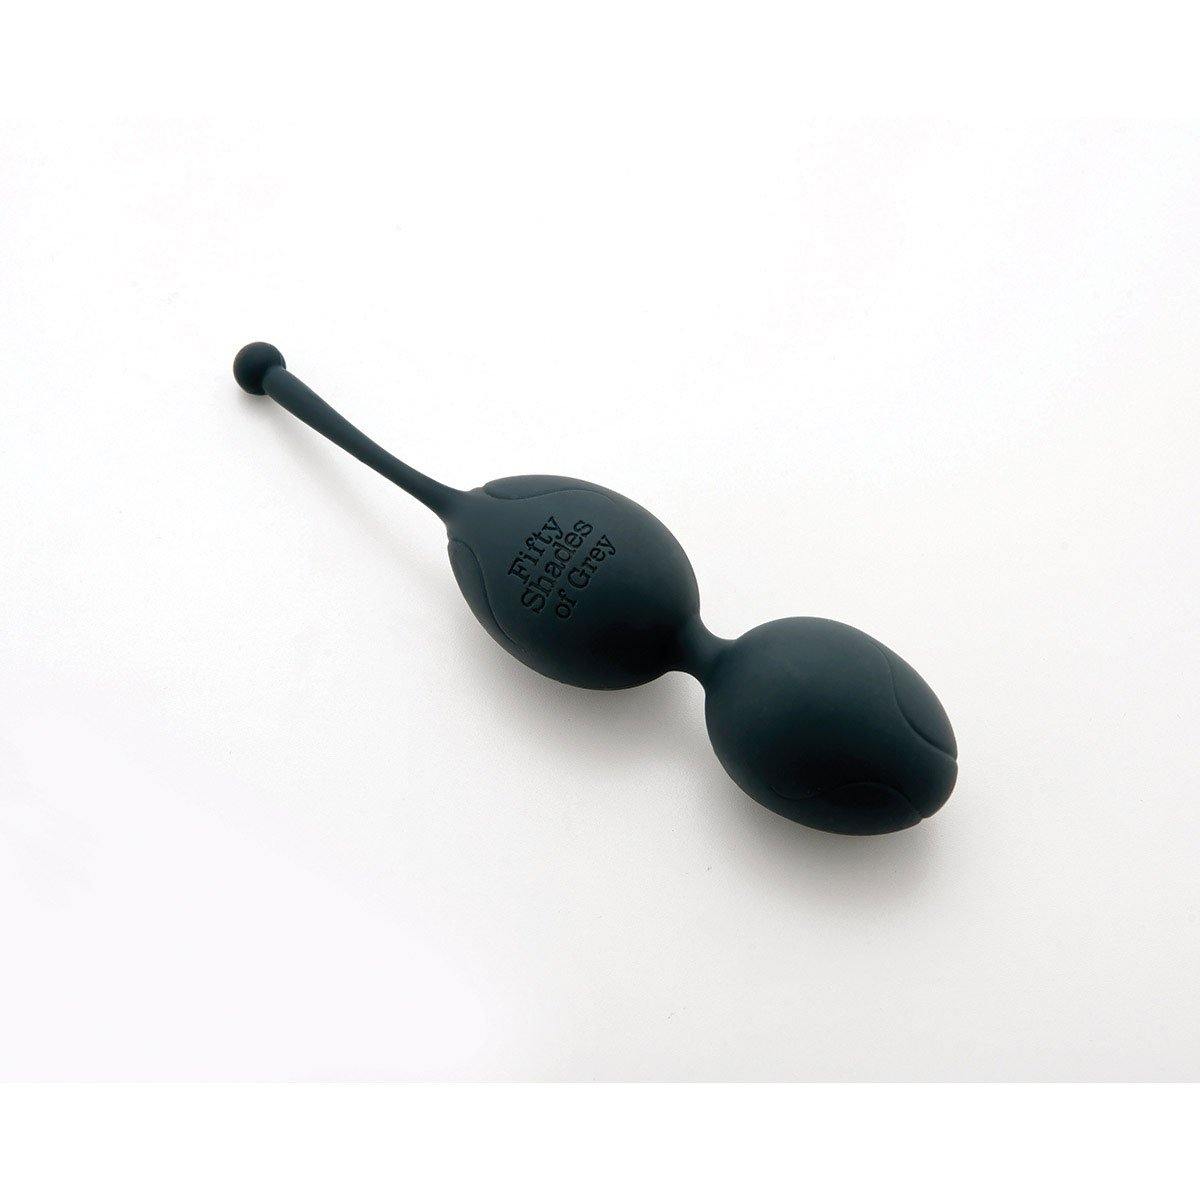 Fifty Shades Delicious Pleasure Silicone Pleasure Balls - Buy At Luxury Toy X - Free 3-Day Shipping